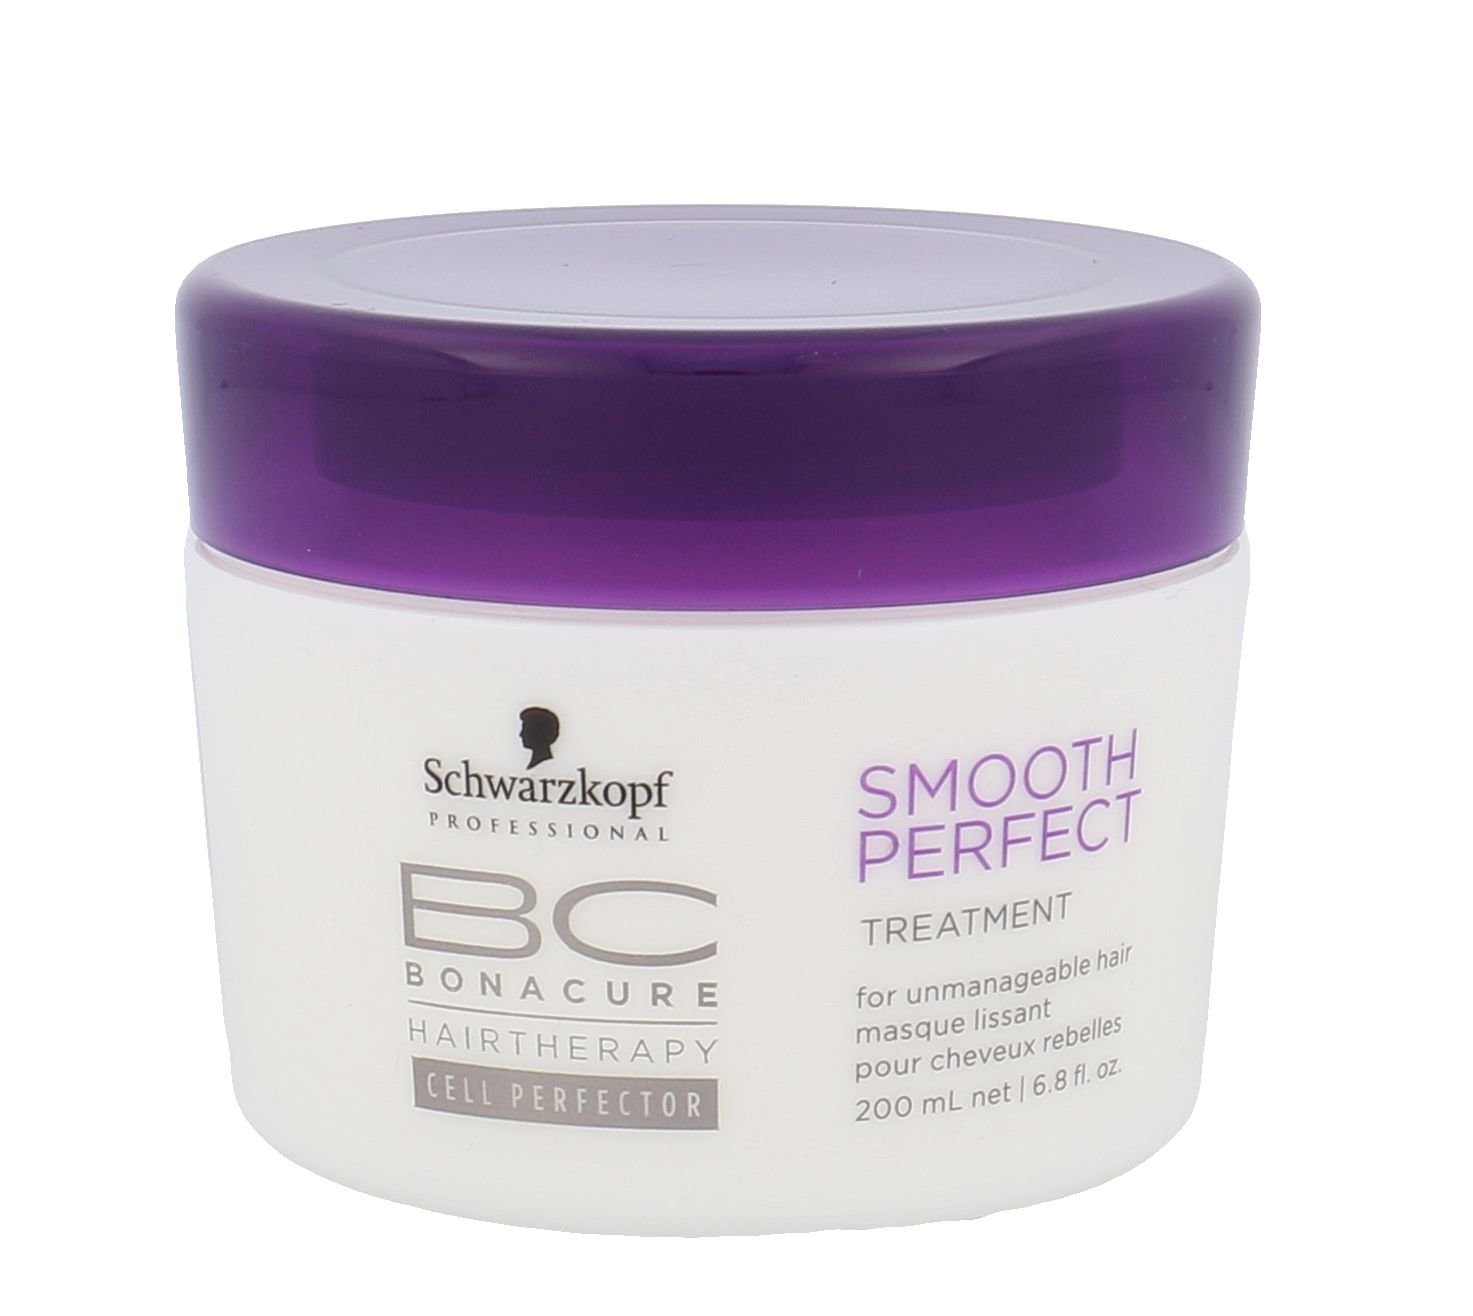 Schwarzkopf BC Cell Perfector Smooth Perfect Treatment